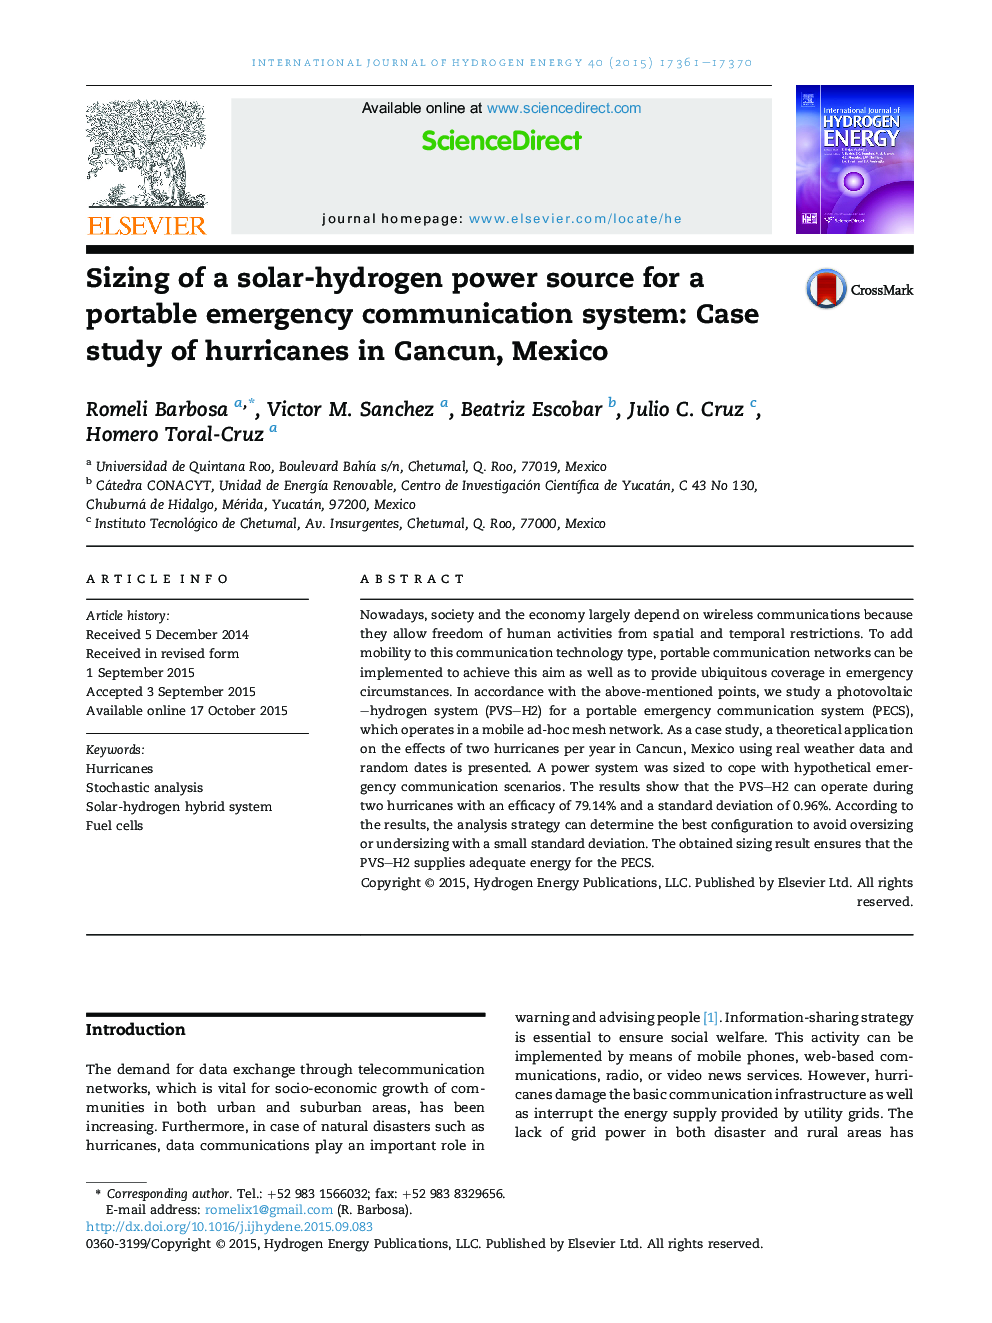 Sizing of a solar-hydrogen power source for a portable emergency communication system: Case study of hurricanes in Cancun, Mexico